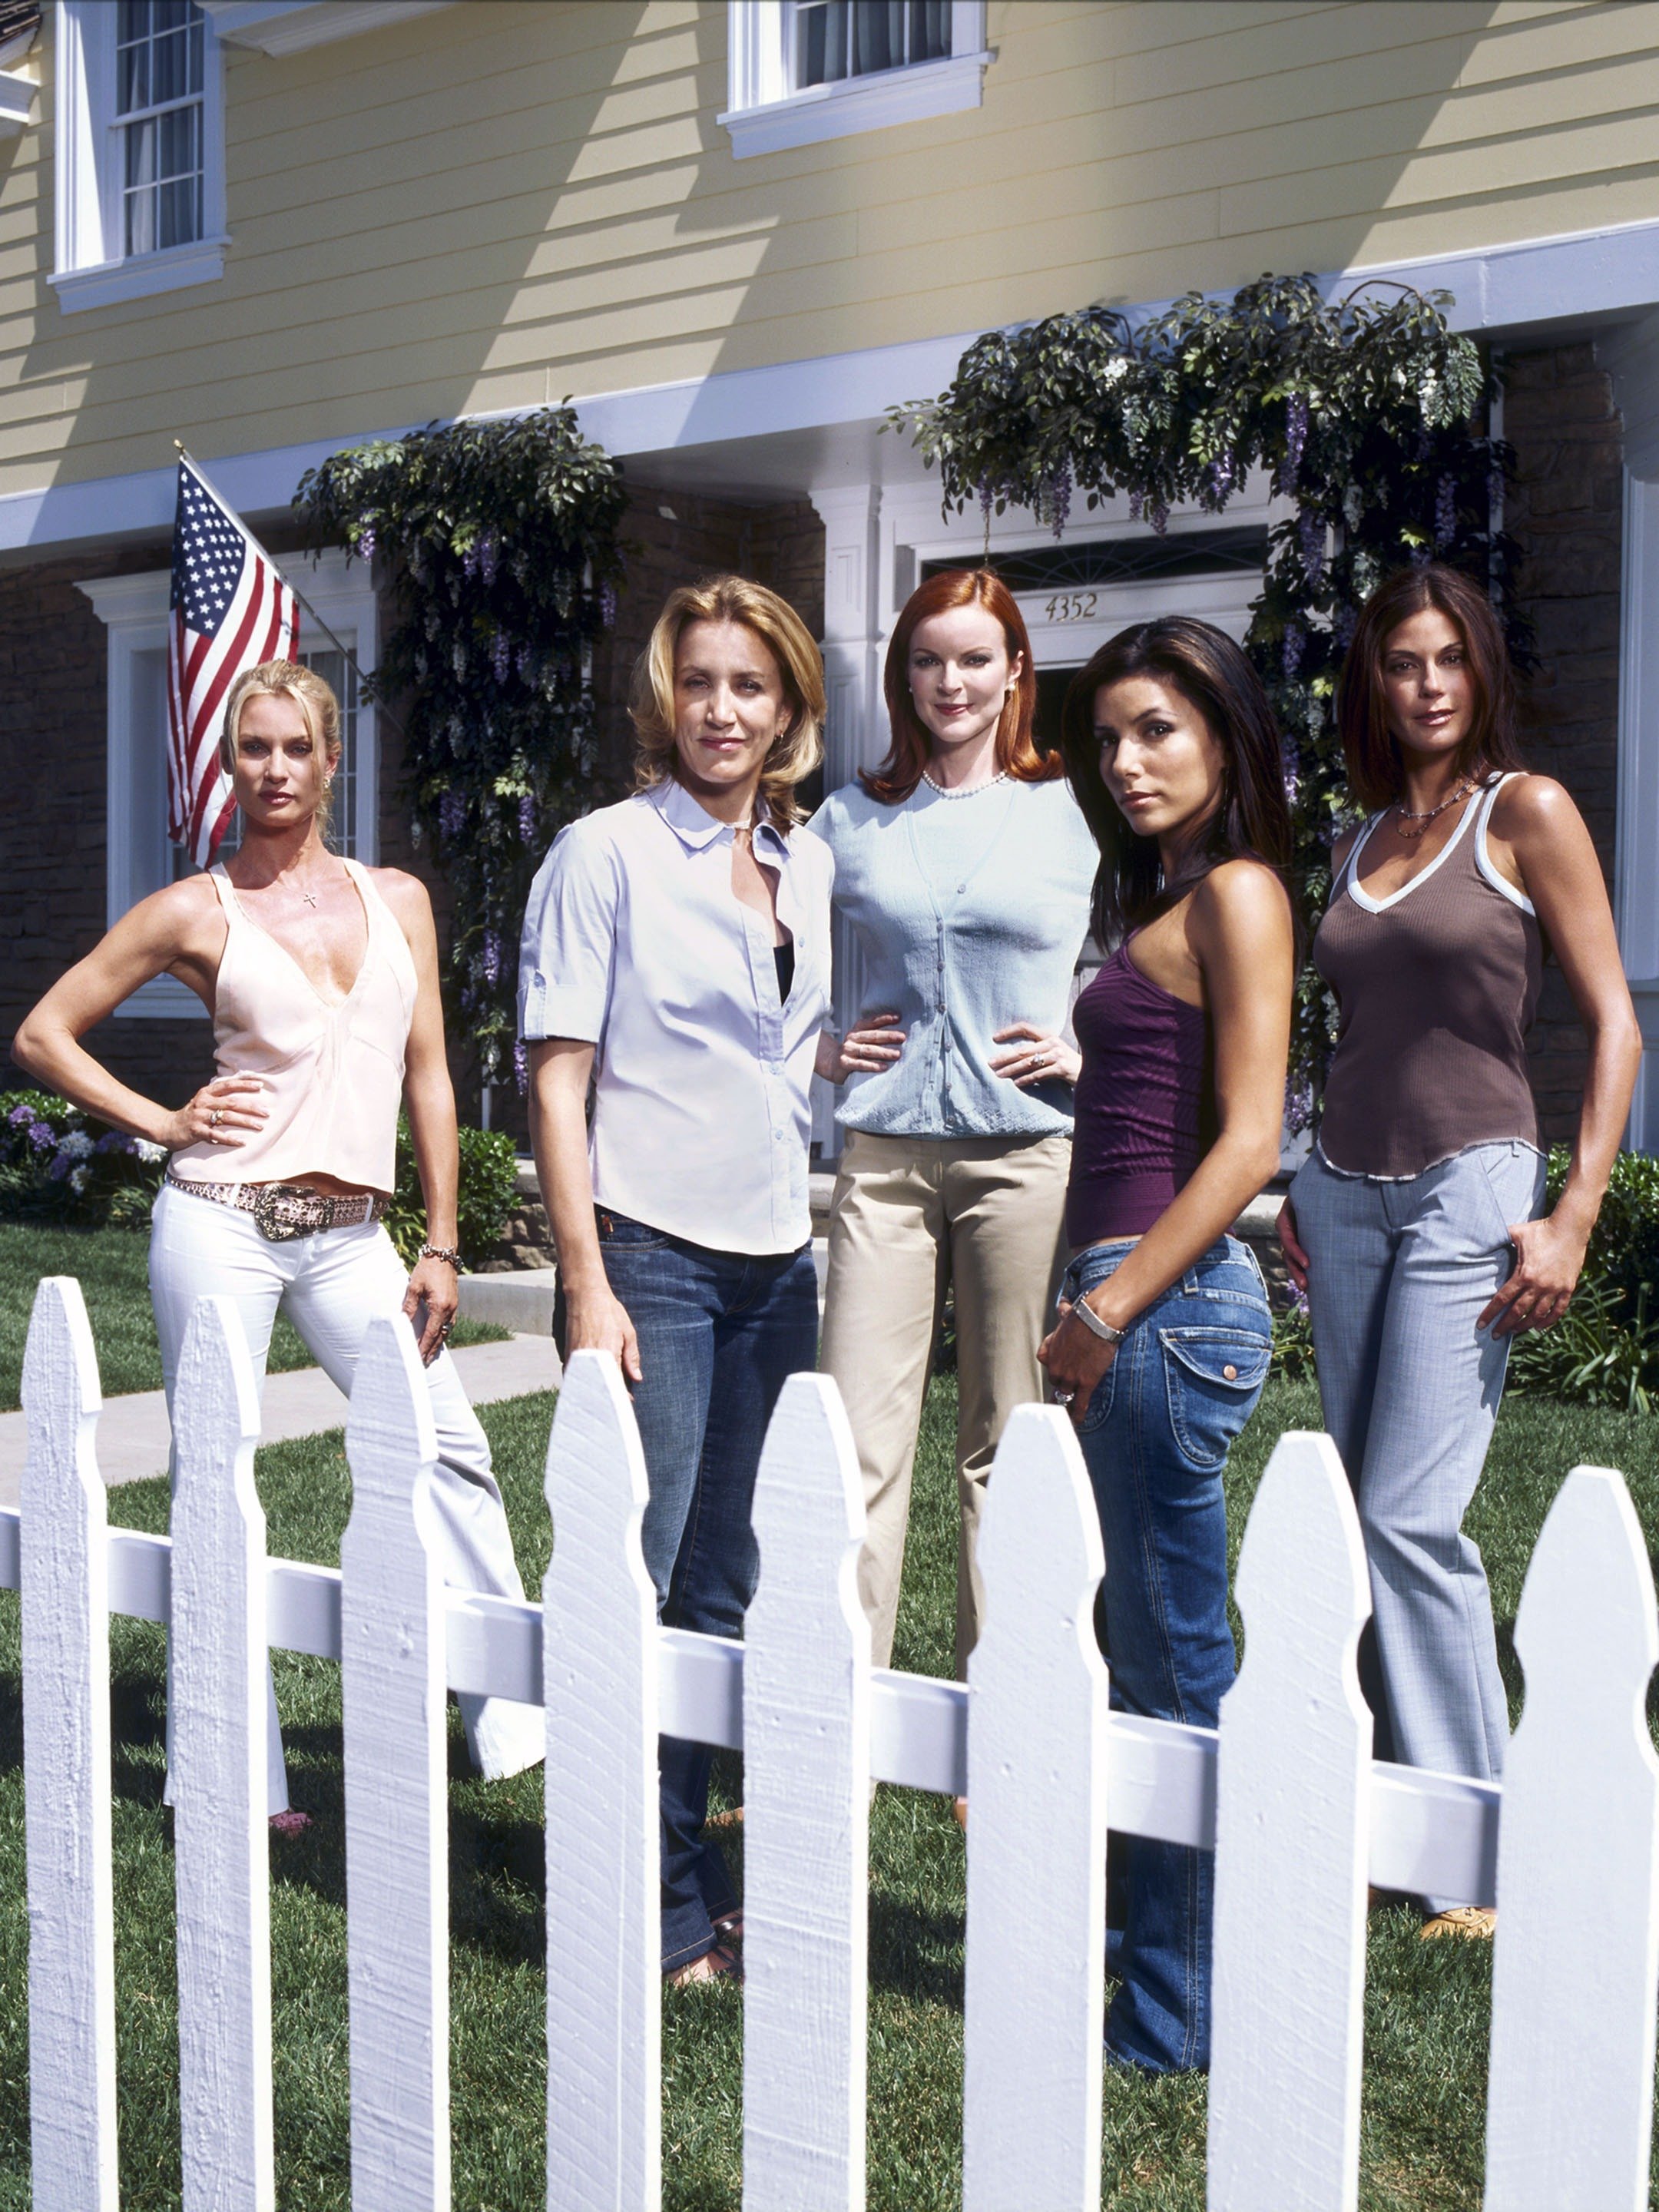 Desperate Housewives image